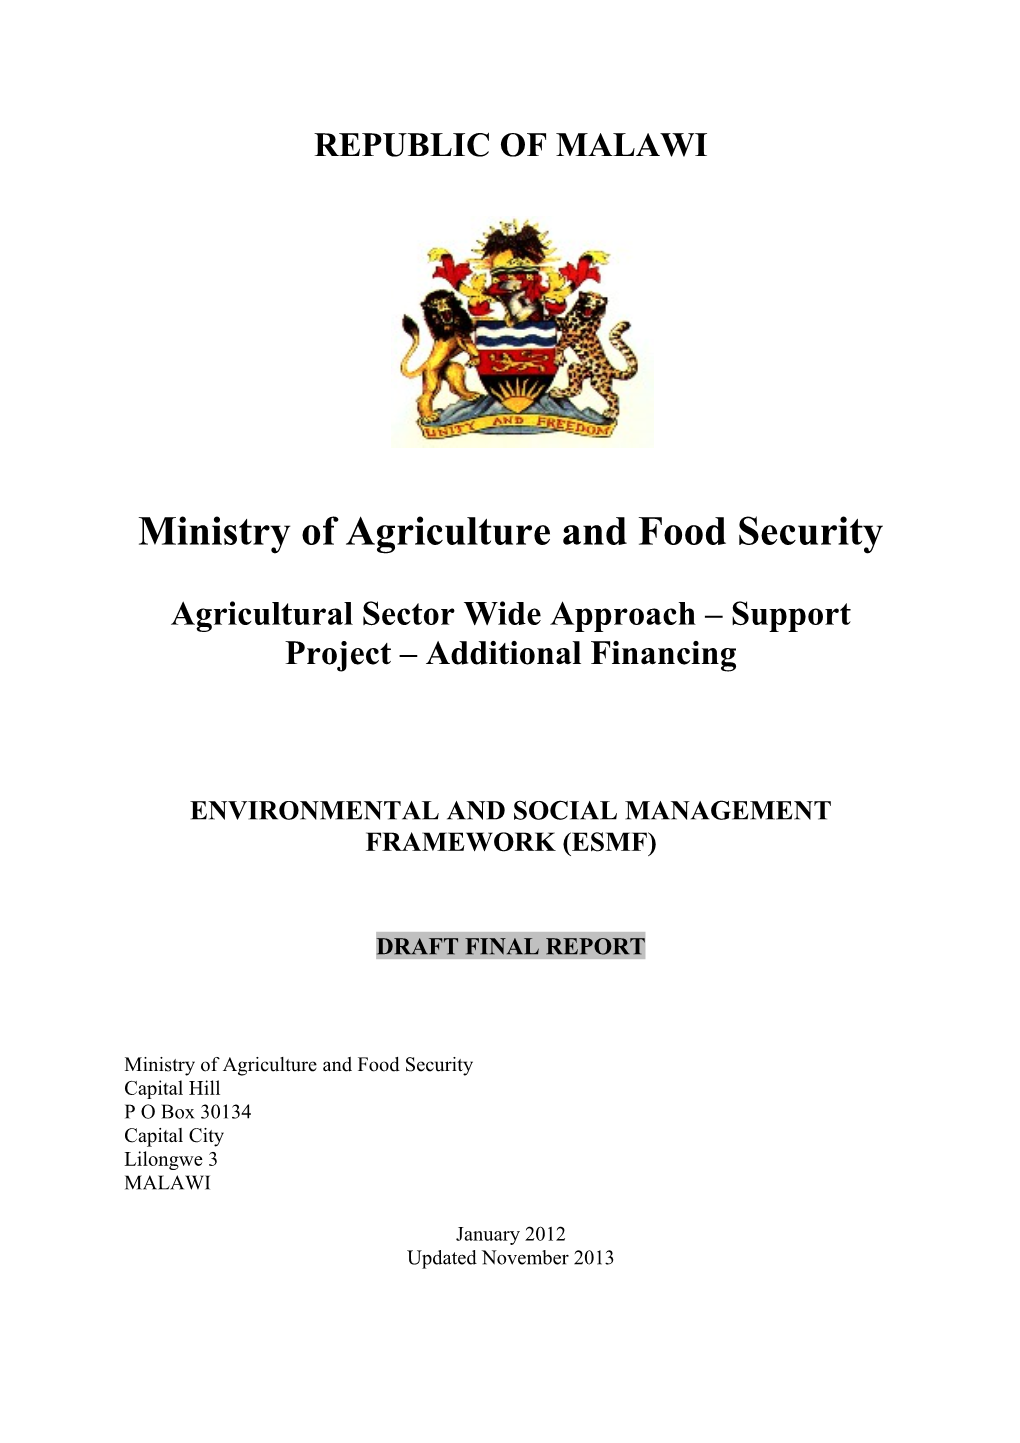 Ministry of Agriculture and Food Security